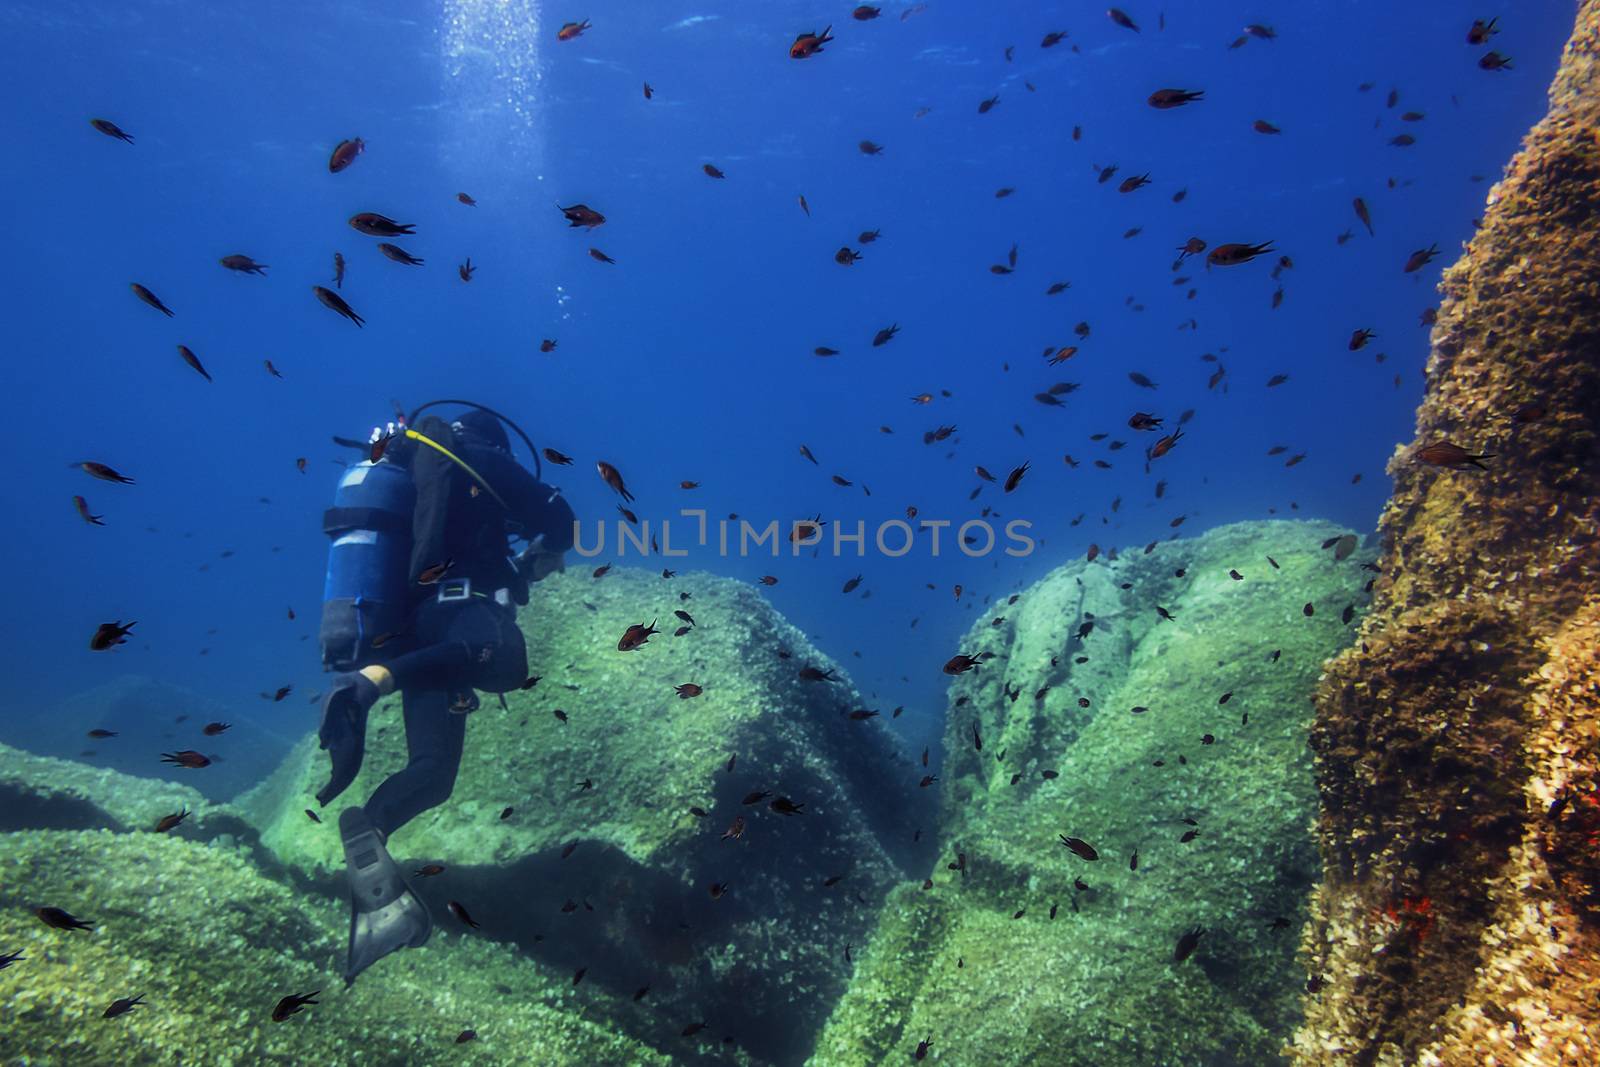 diver in the blue sea surrounded by red fish by raulmelldo